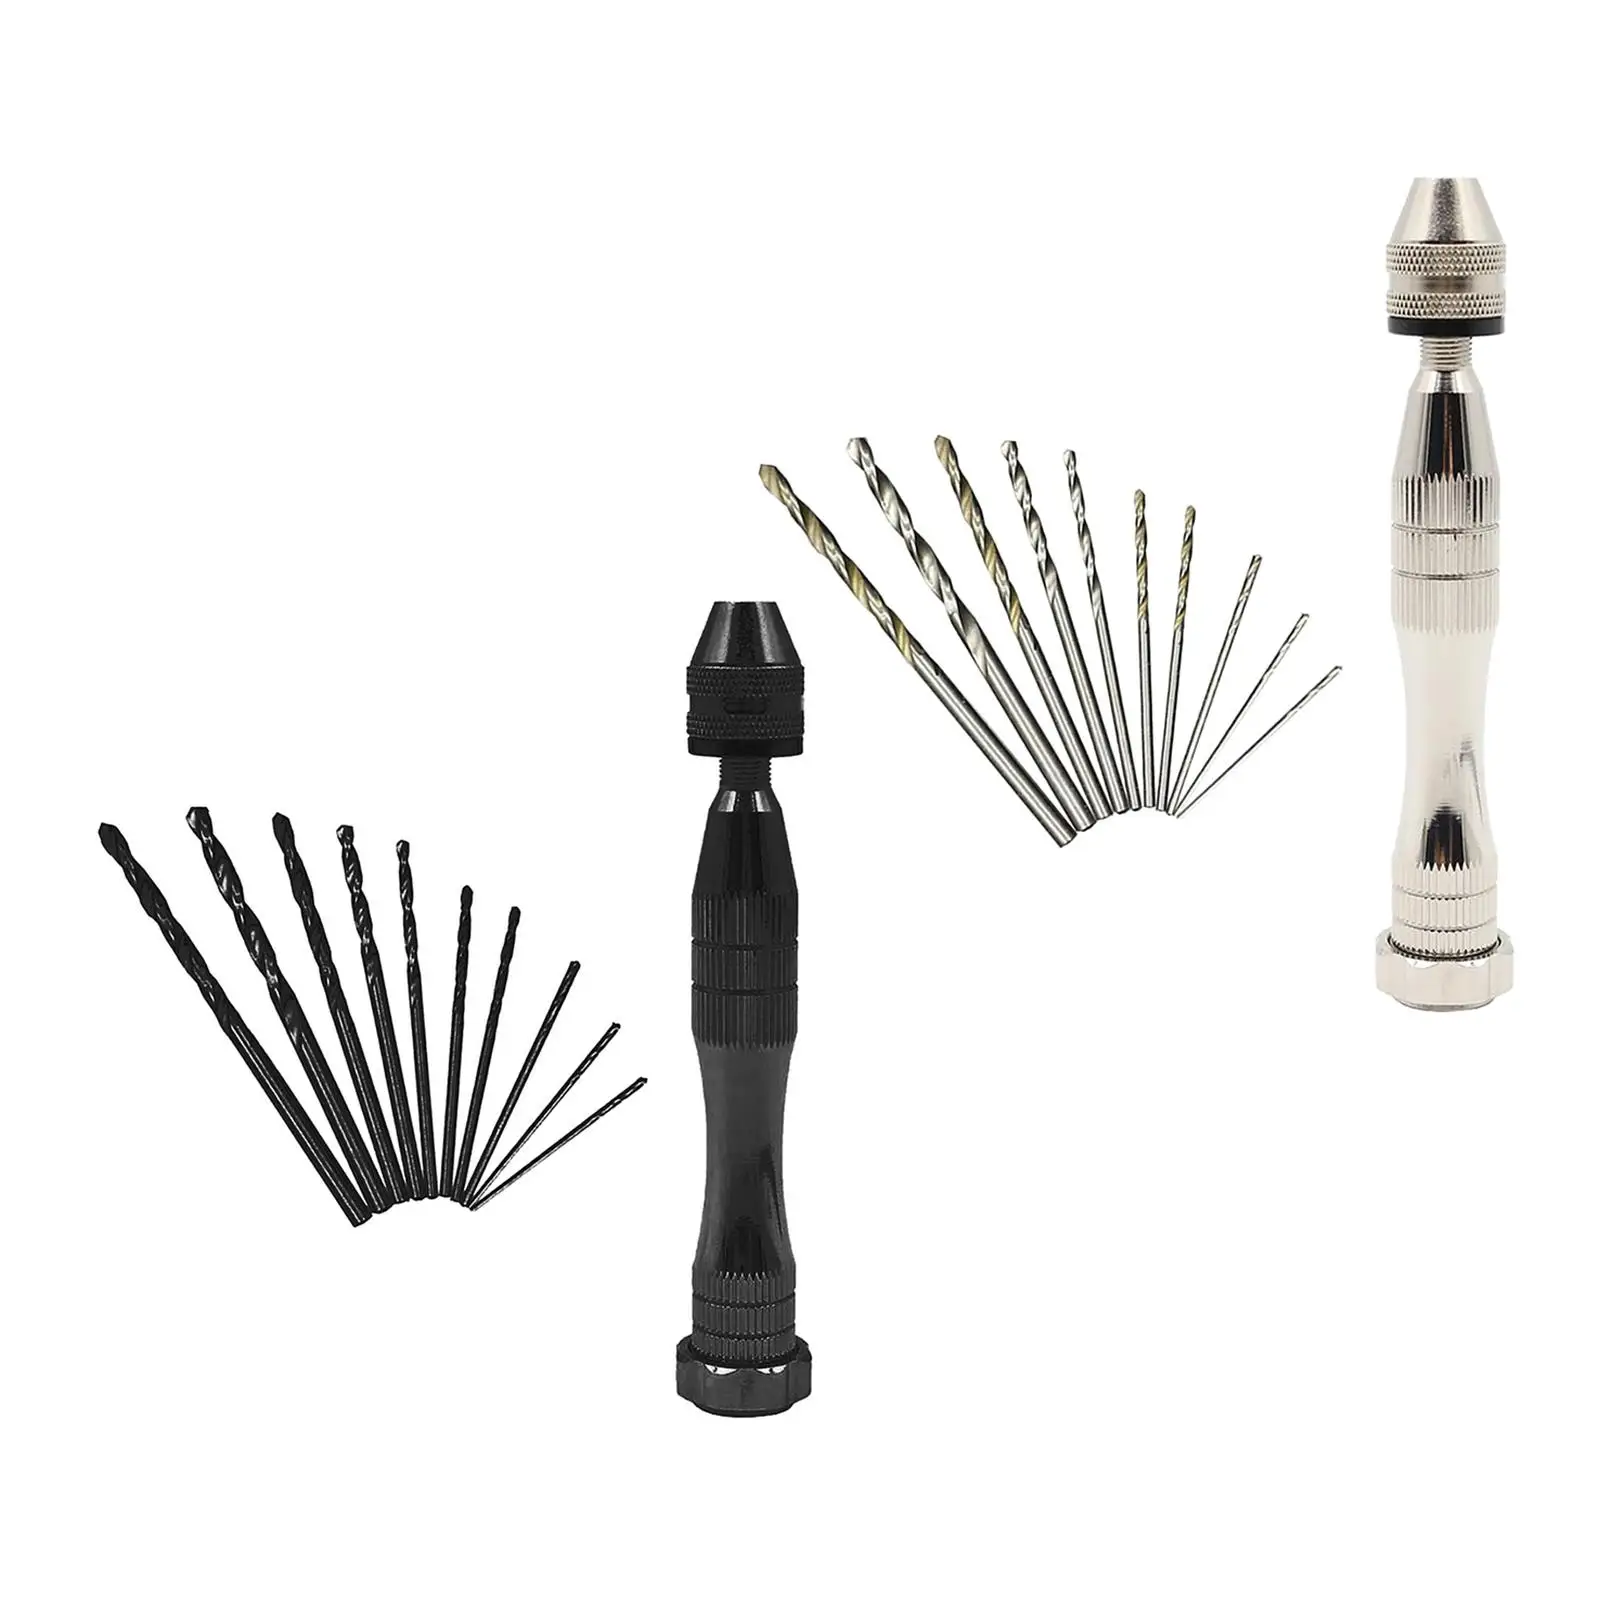 Pin Vise Hand  Precision Hand Pin Vise Rotary Tools 0.8-3mm Twist Drills Hand  Set for Tipped Bead Wood